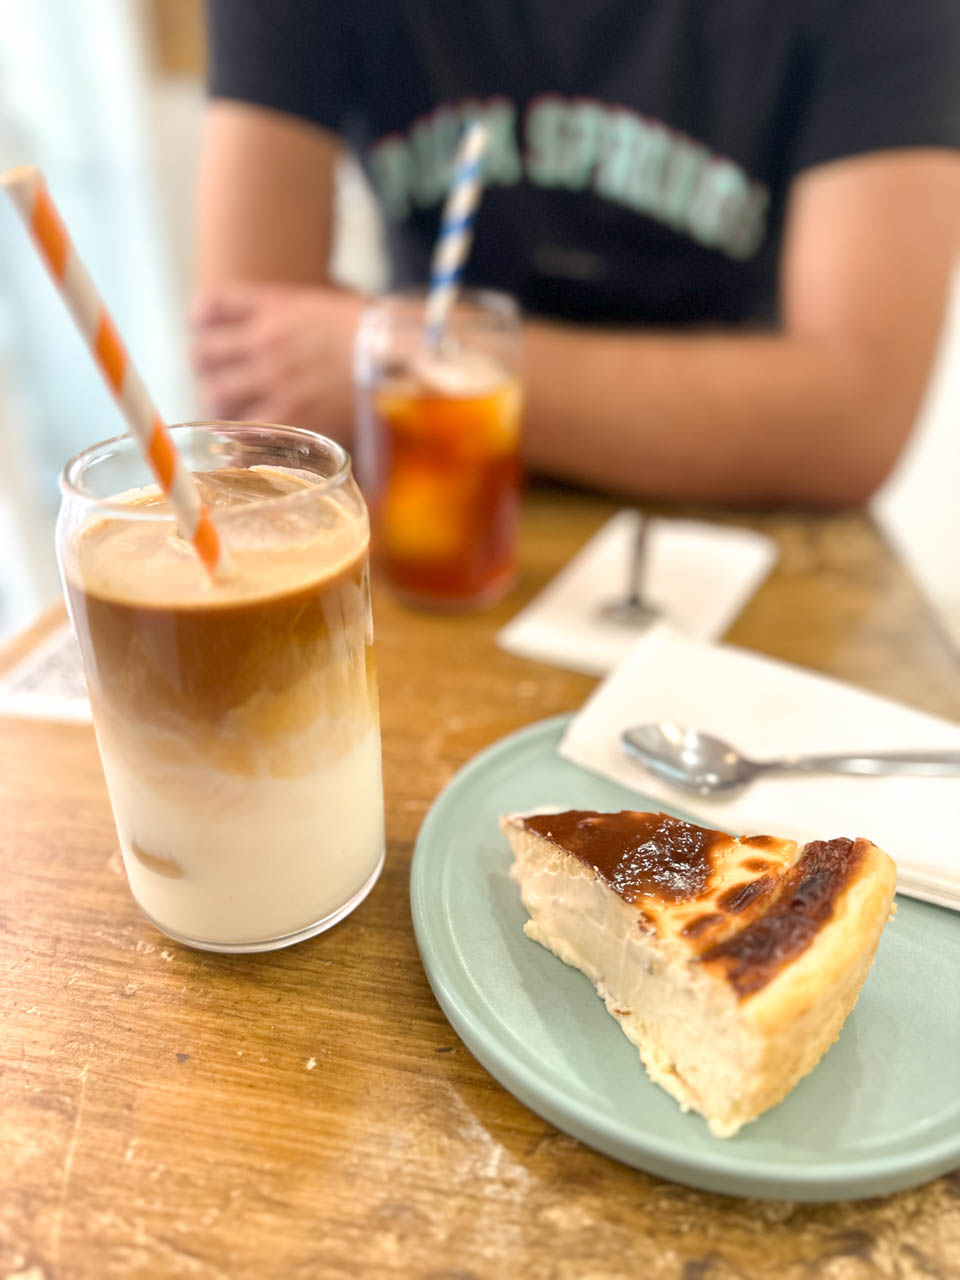 A glass of iced coffee with milk and a slice of cheesecake on a blue plate in a café in Malaga